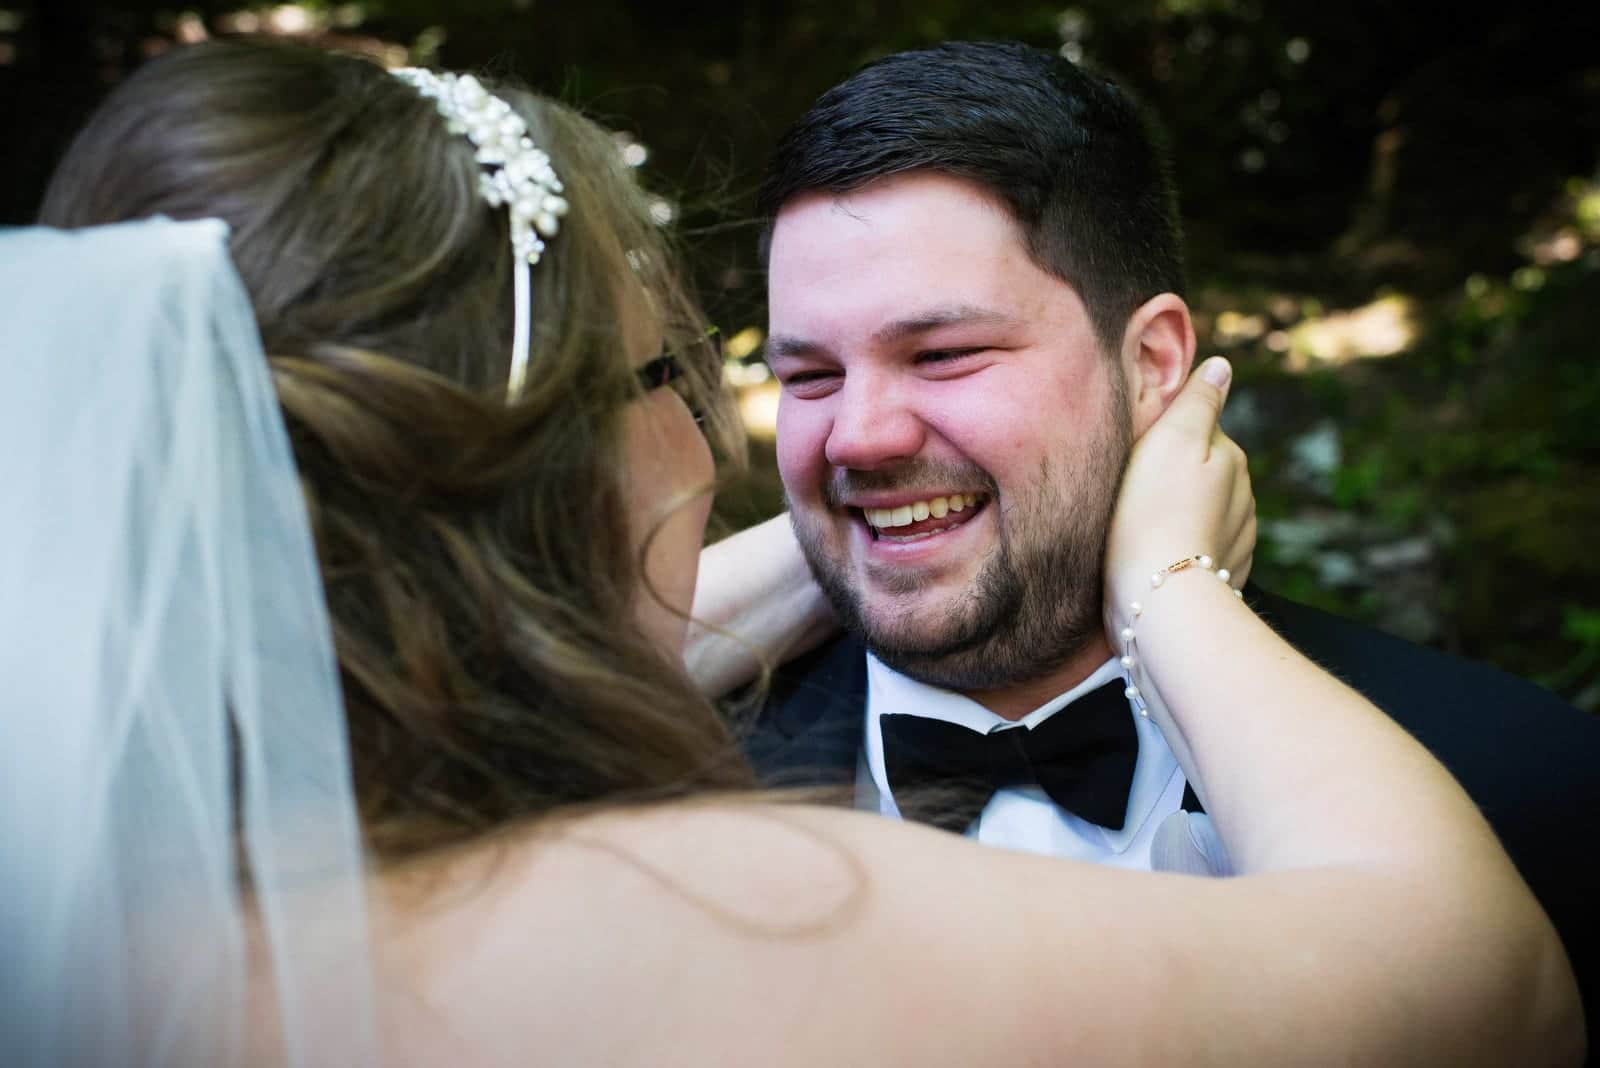 A groom grins as his bride holds his head in her hands before their Seven Springs wedding.